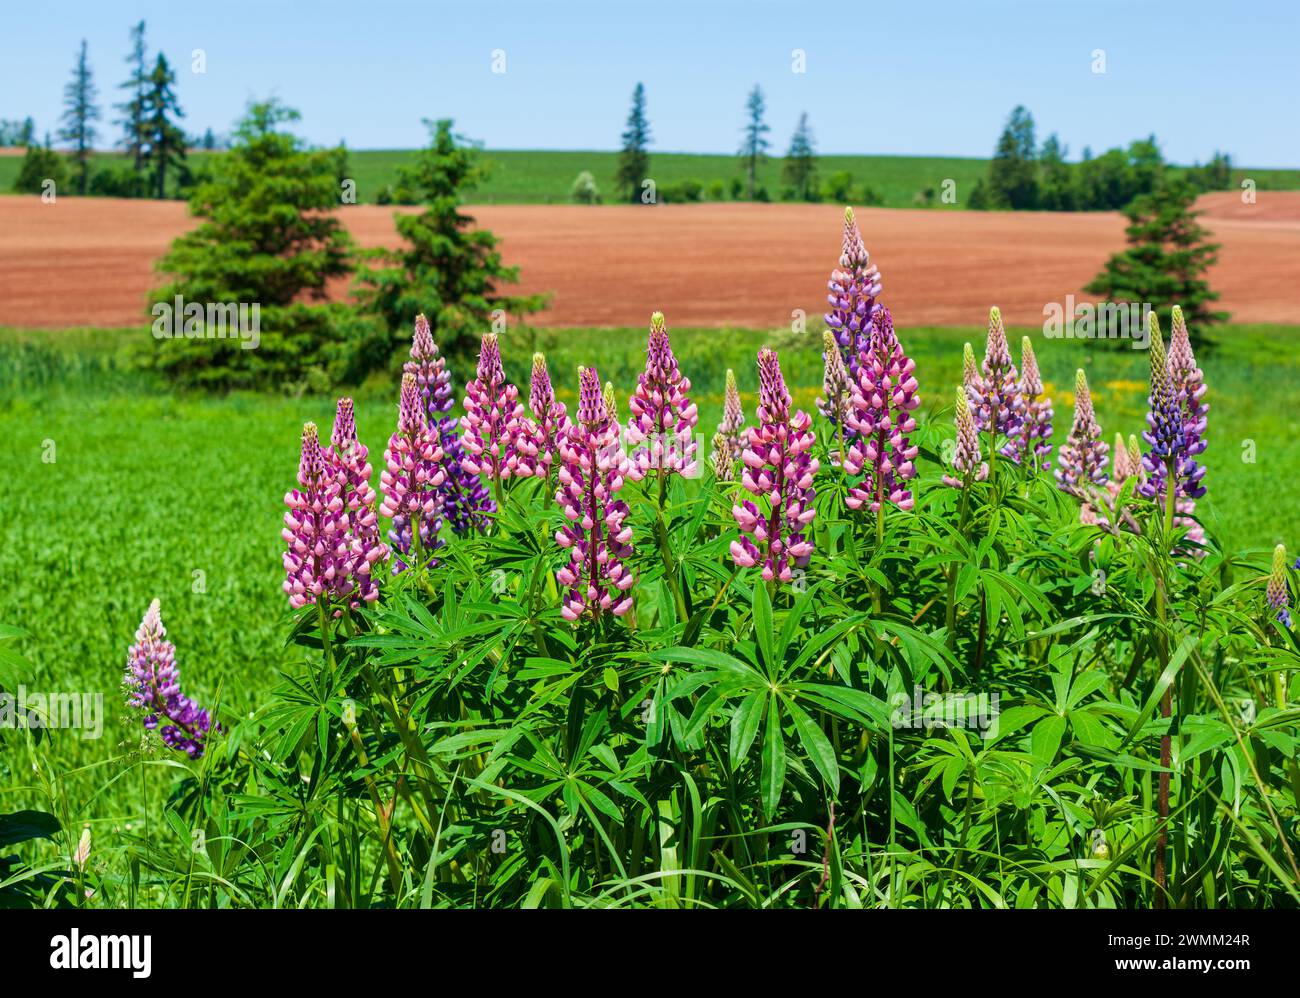 Colorful lupine flowers in shades of pink and purple. Farmlands with green and plowed fields, spotted with spruce trees. Prince Edward Island, Canada. Stock Photo